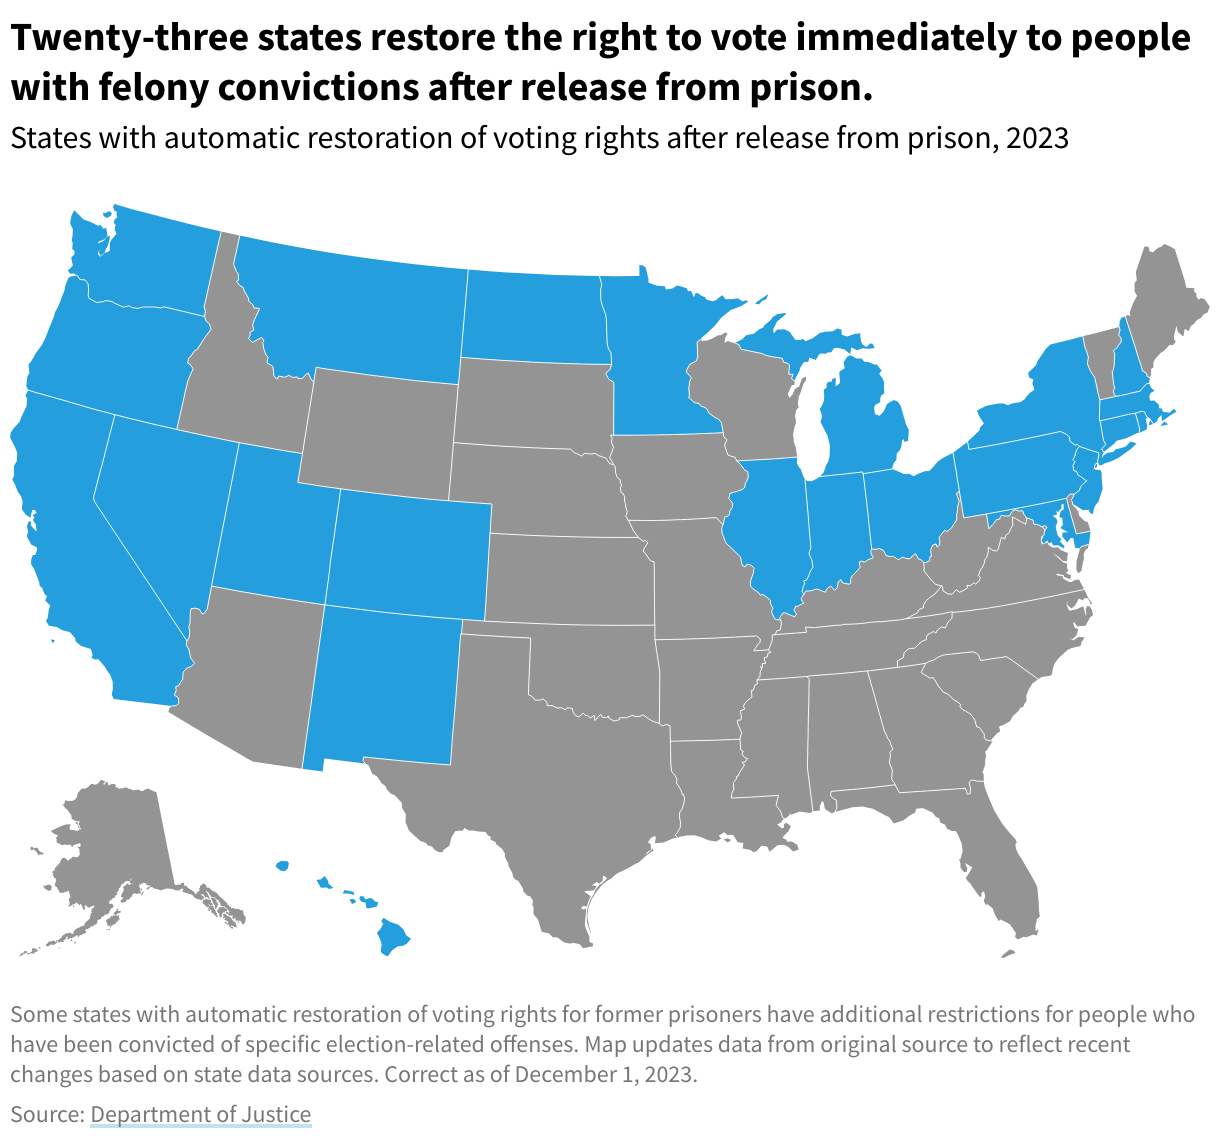 Map of the U.S. showing 23 states that restore the right to vote immediately to people with felony convictions after release from prison.